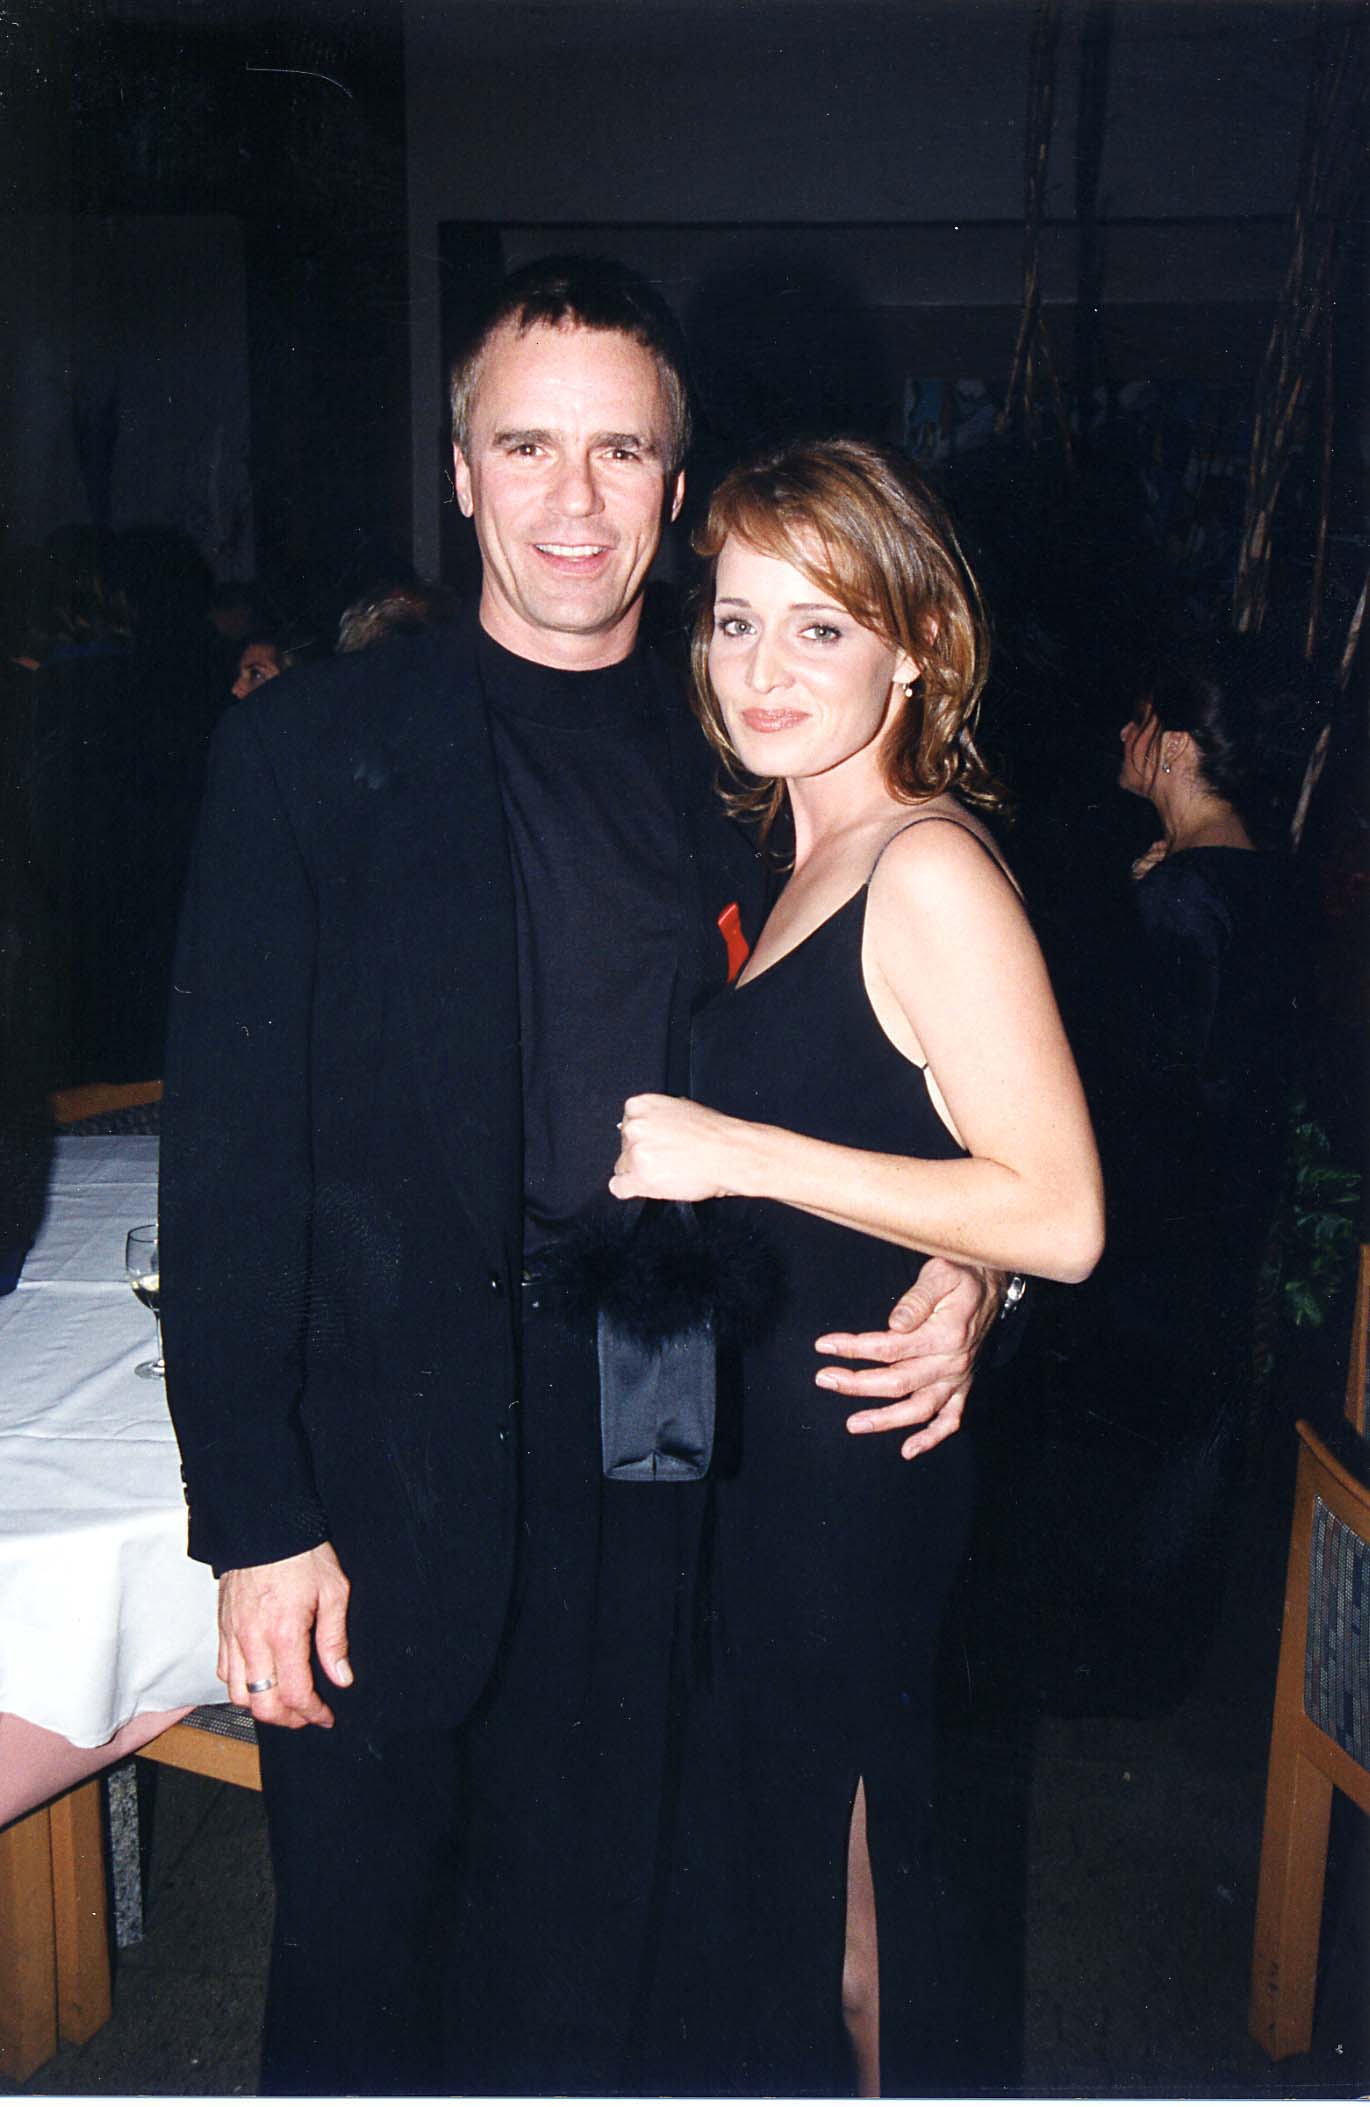 Richard Dean Anderson and Apryl Prose during the Cable ACE Awards in Los Angeles, California on September 6, 1997 | Source: Getty Images